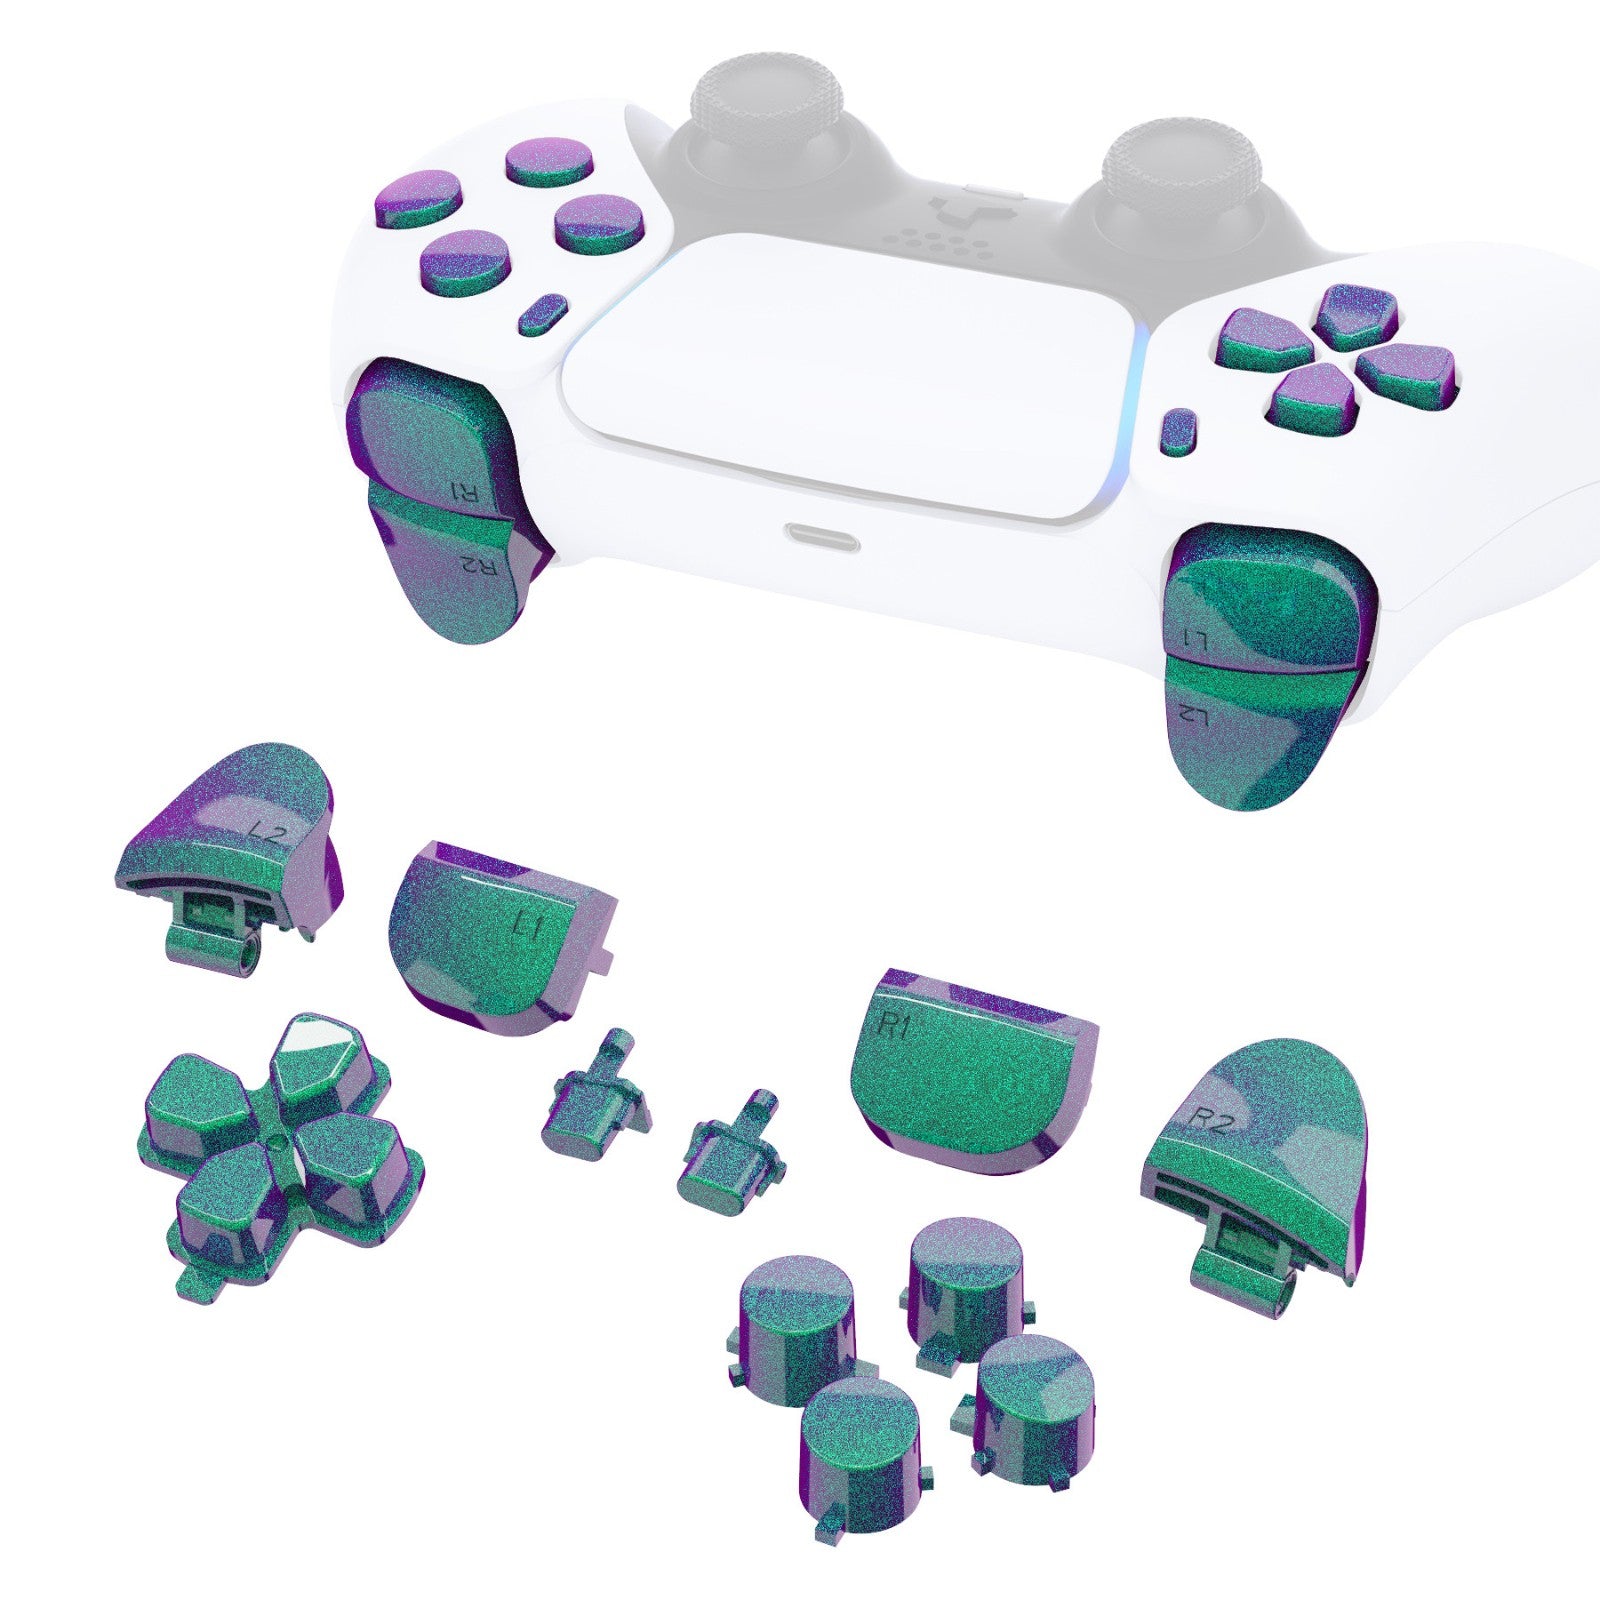 eXtremeRate Retail Replacement D-pad R1 L1 R2 L2 Triggers Share Options Face Buttons, Chameleon Green Purple Full Set Buttons Compatible with ps5 Controller BDM-010 & BDM-020 - JPF1002G2